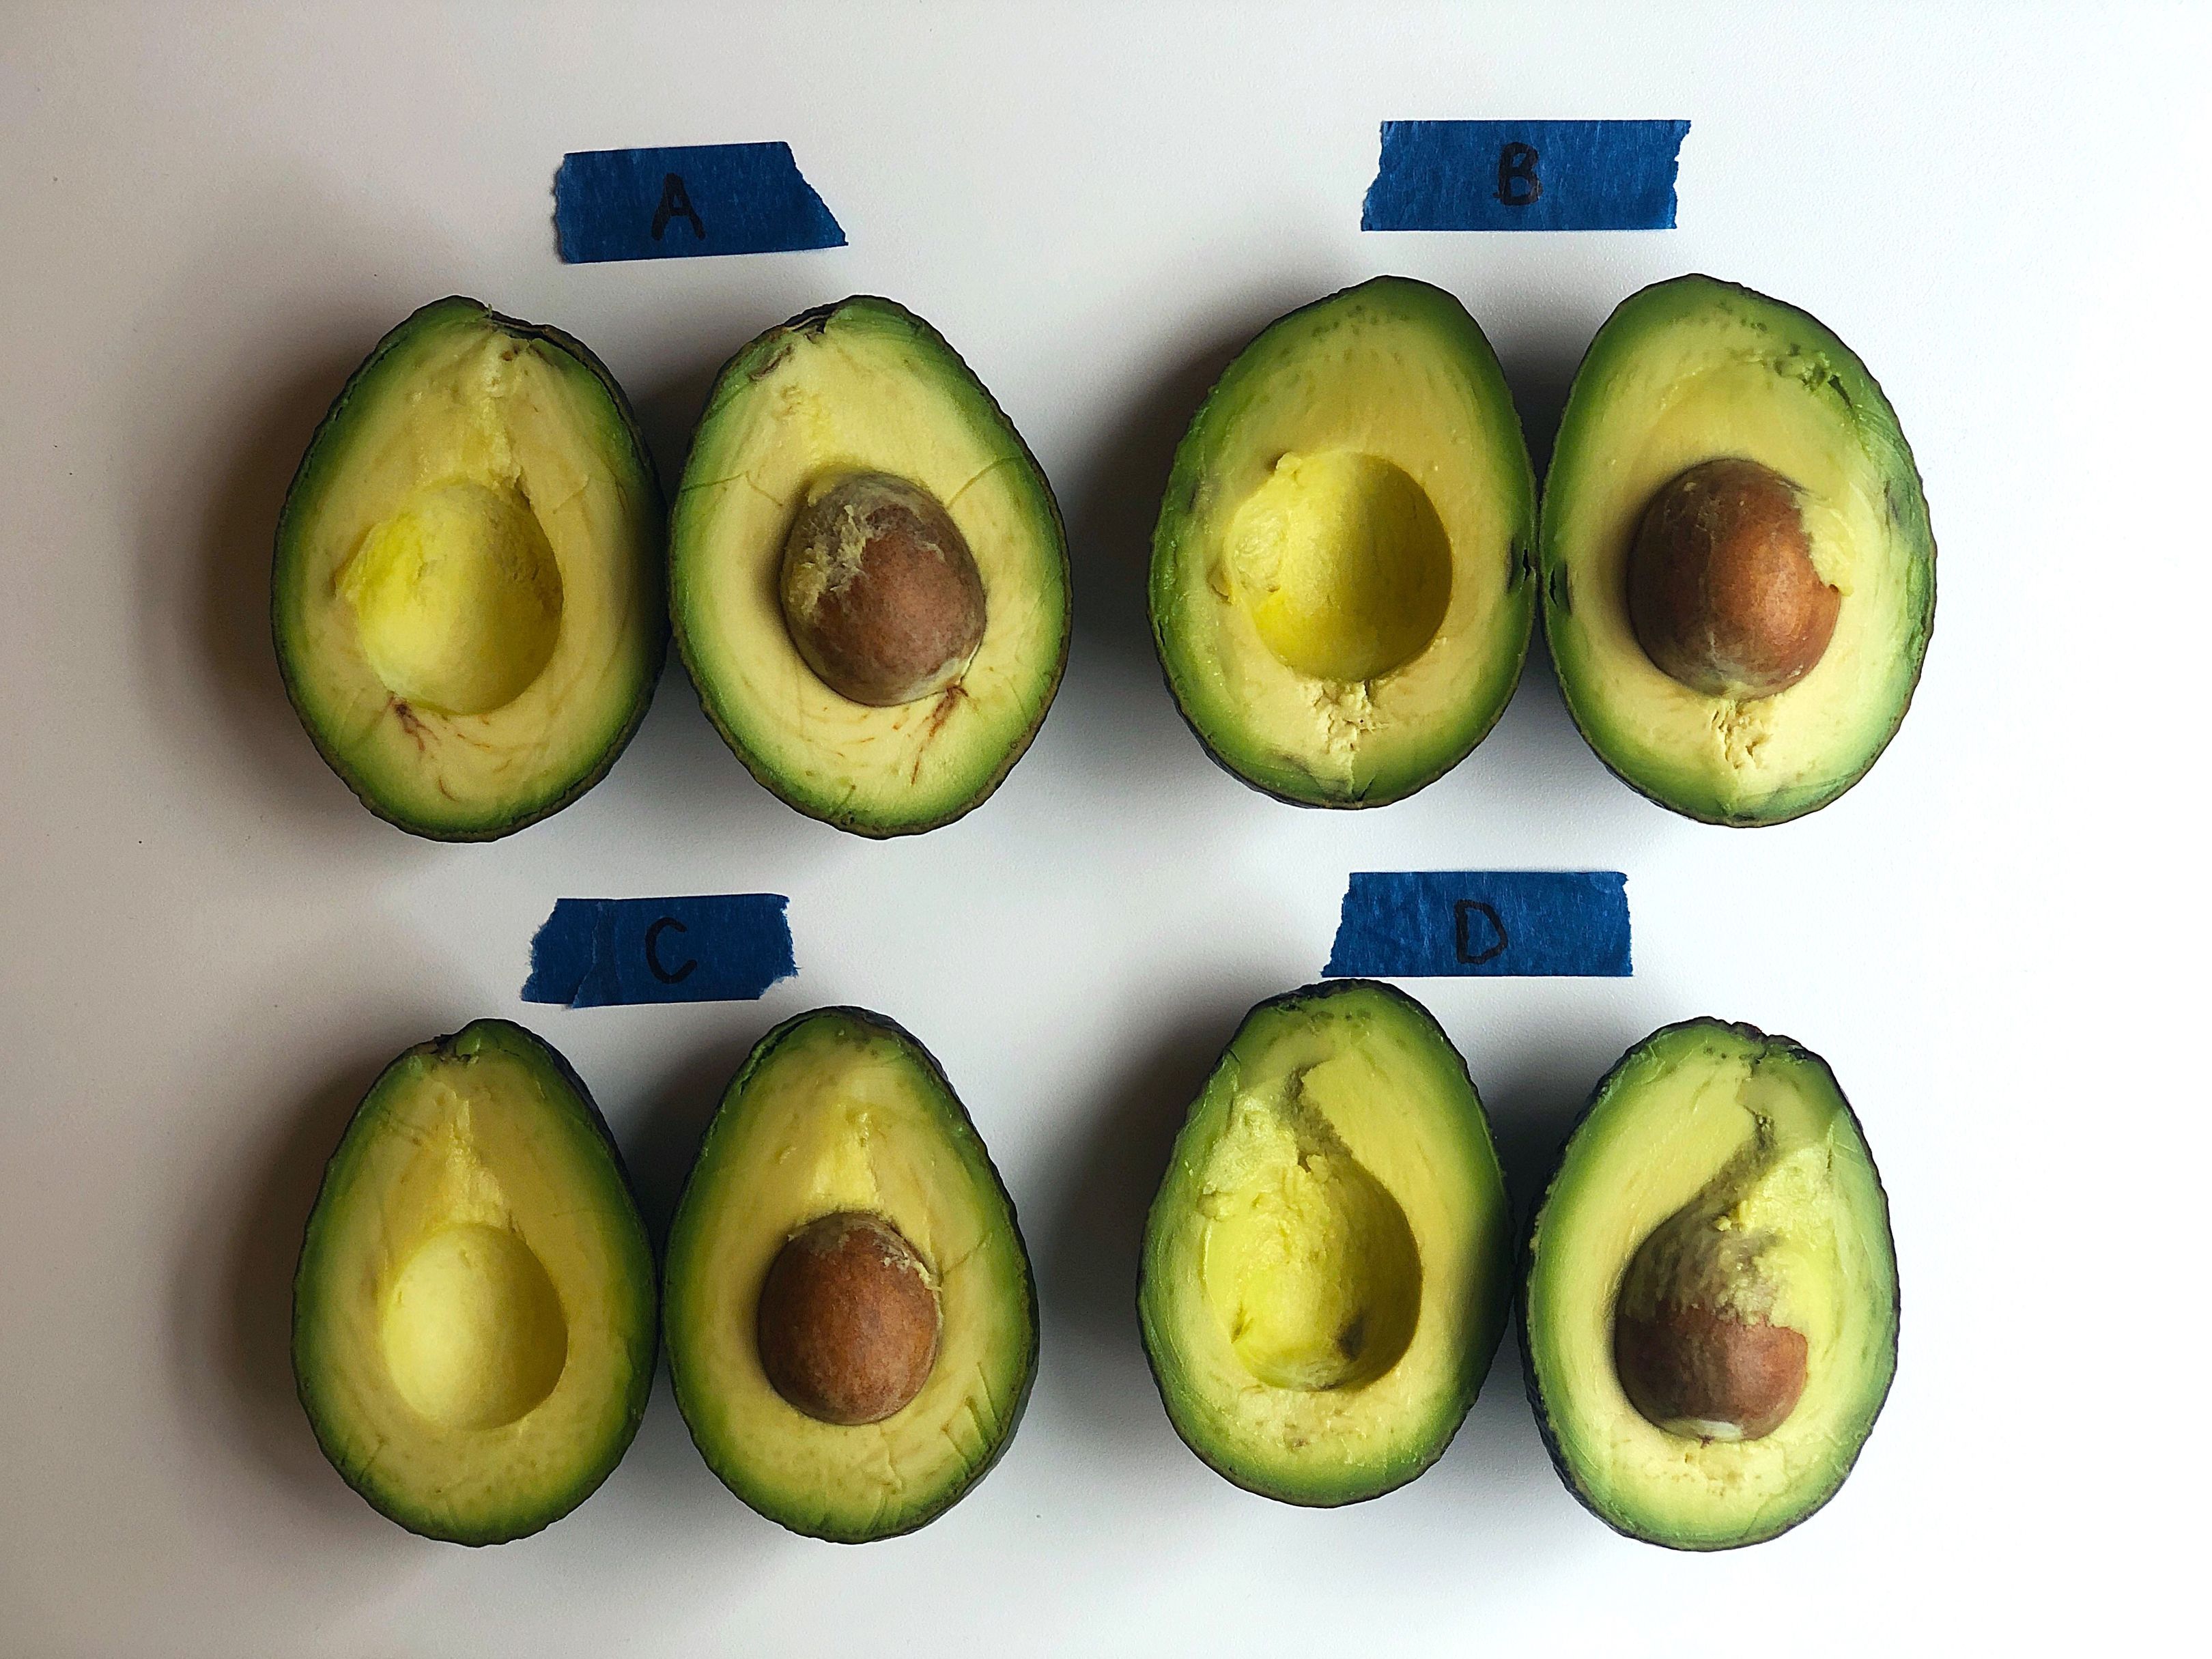 A 15-Minute Avocado Ripening Hack—& 3 Other Tricks